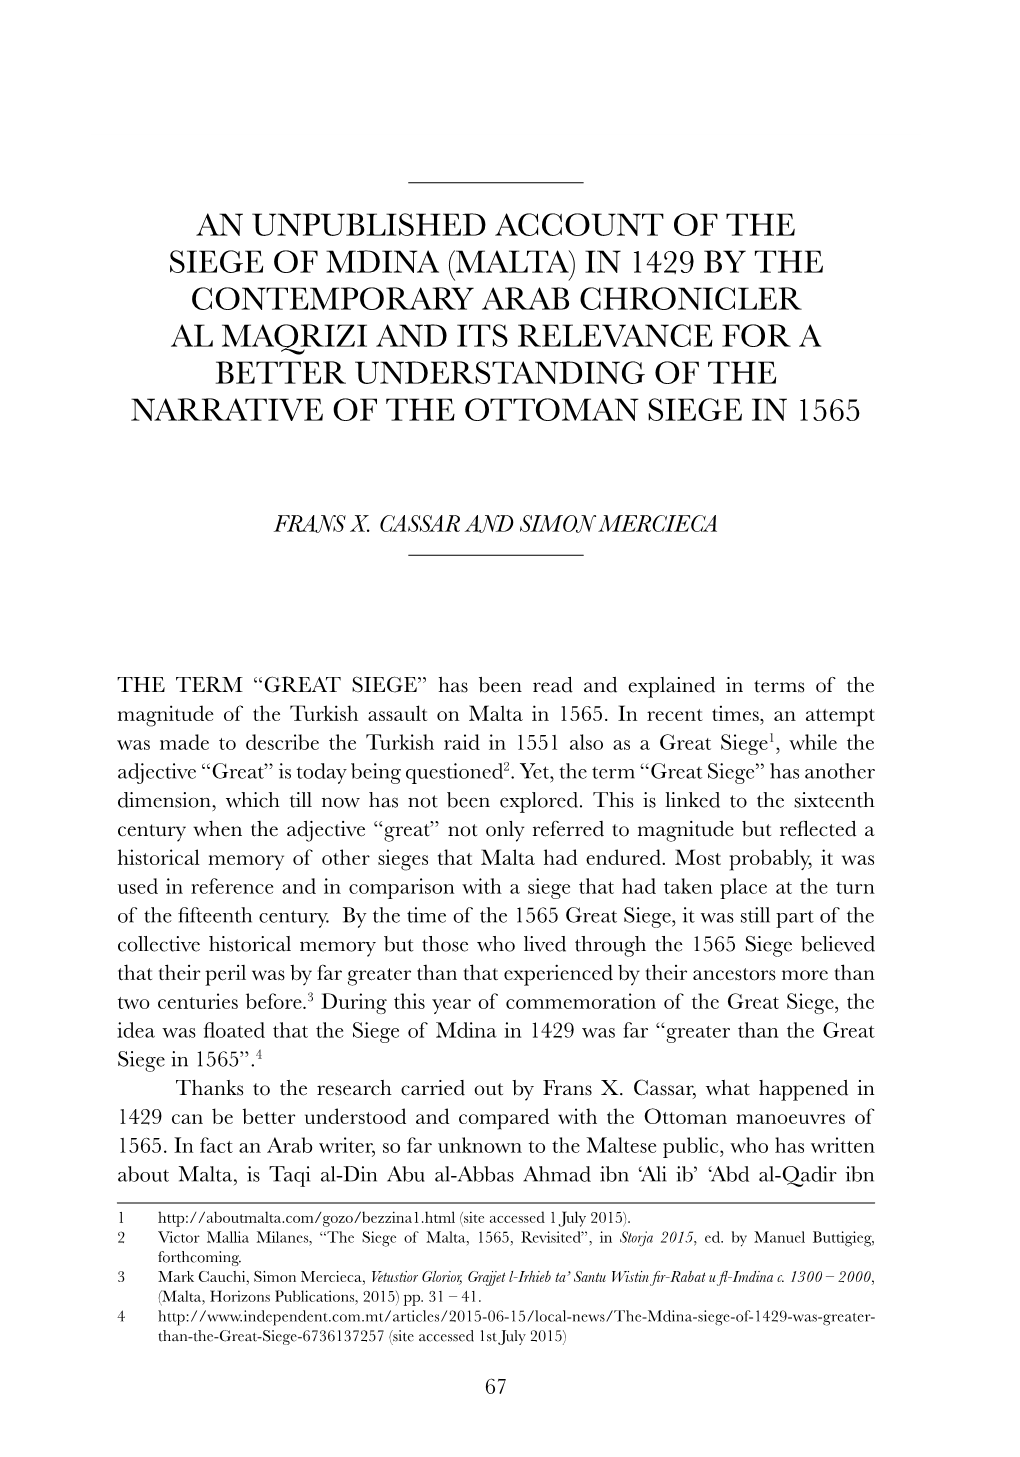 An Unpublished Account of the Siege of Mdina (Malta) in 1429